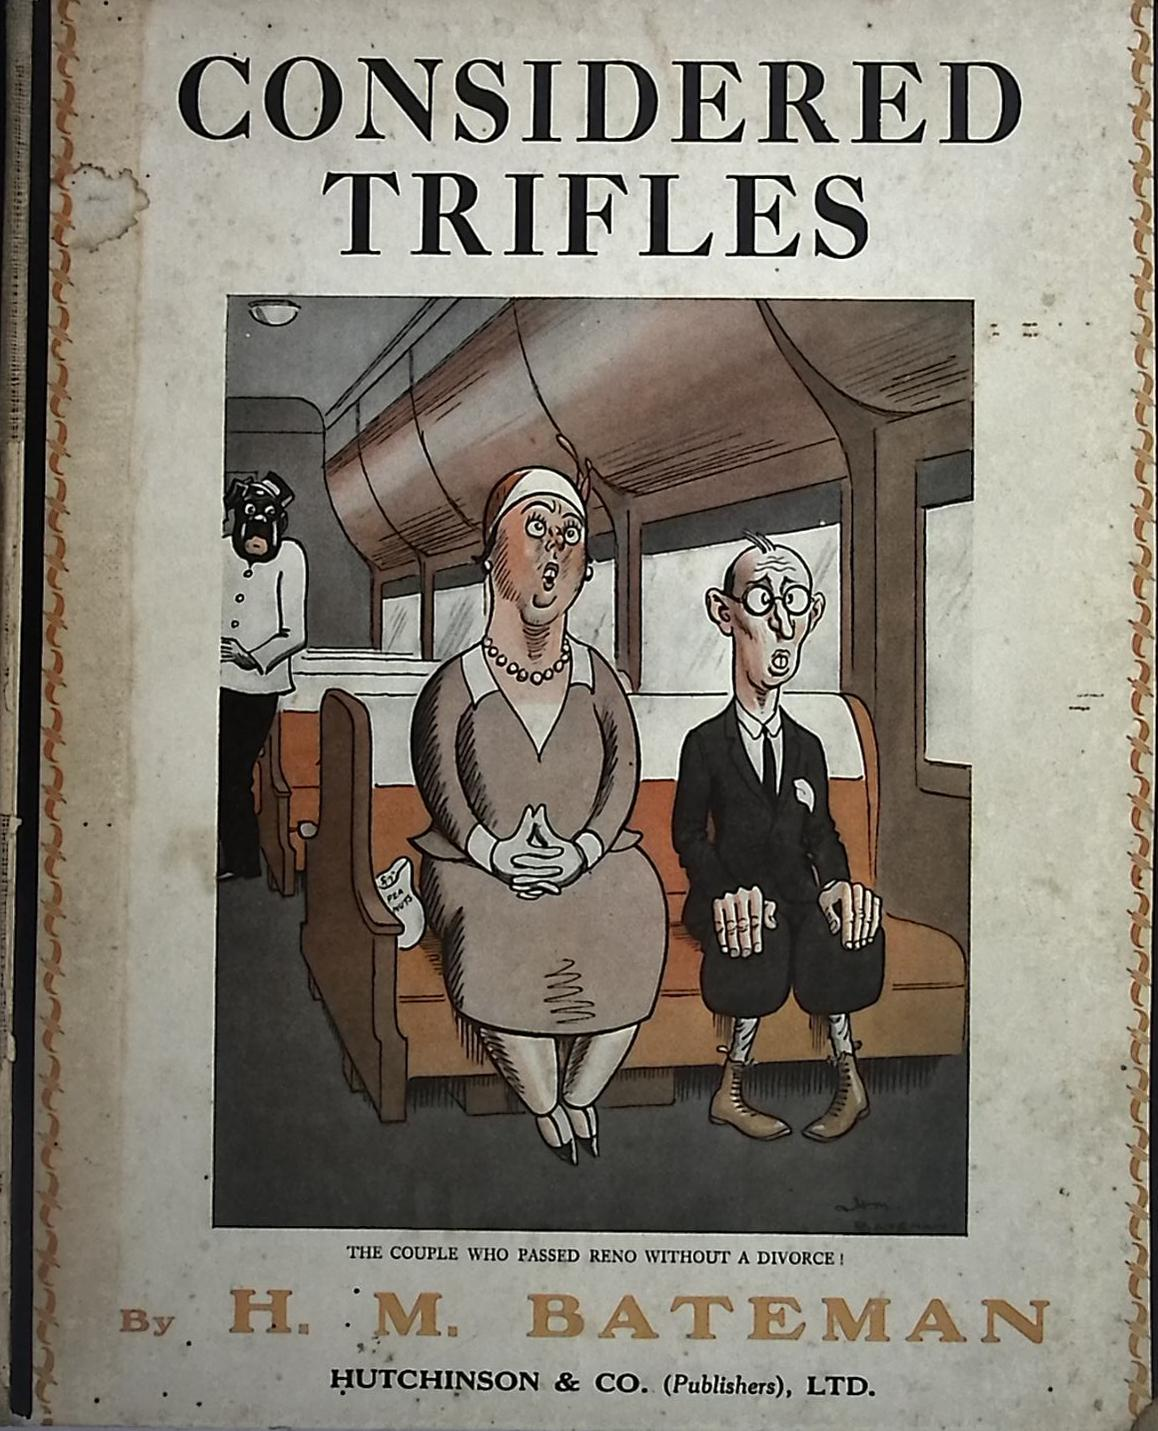 Considered Trifles